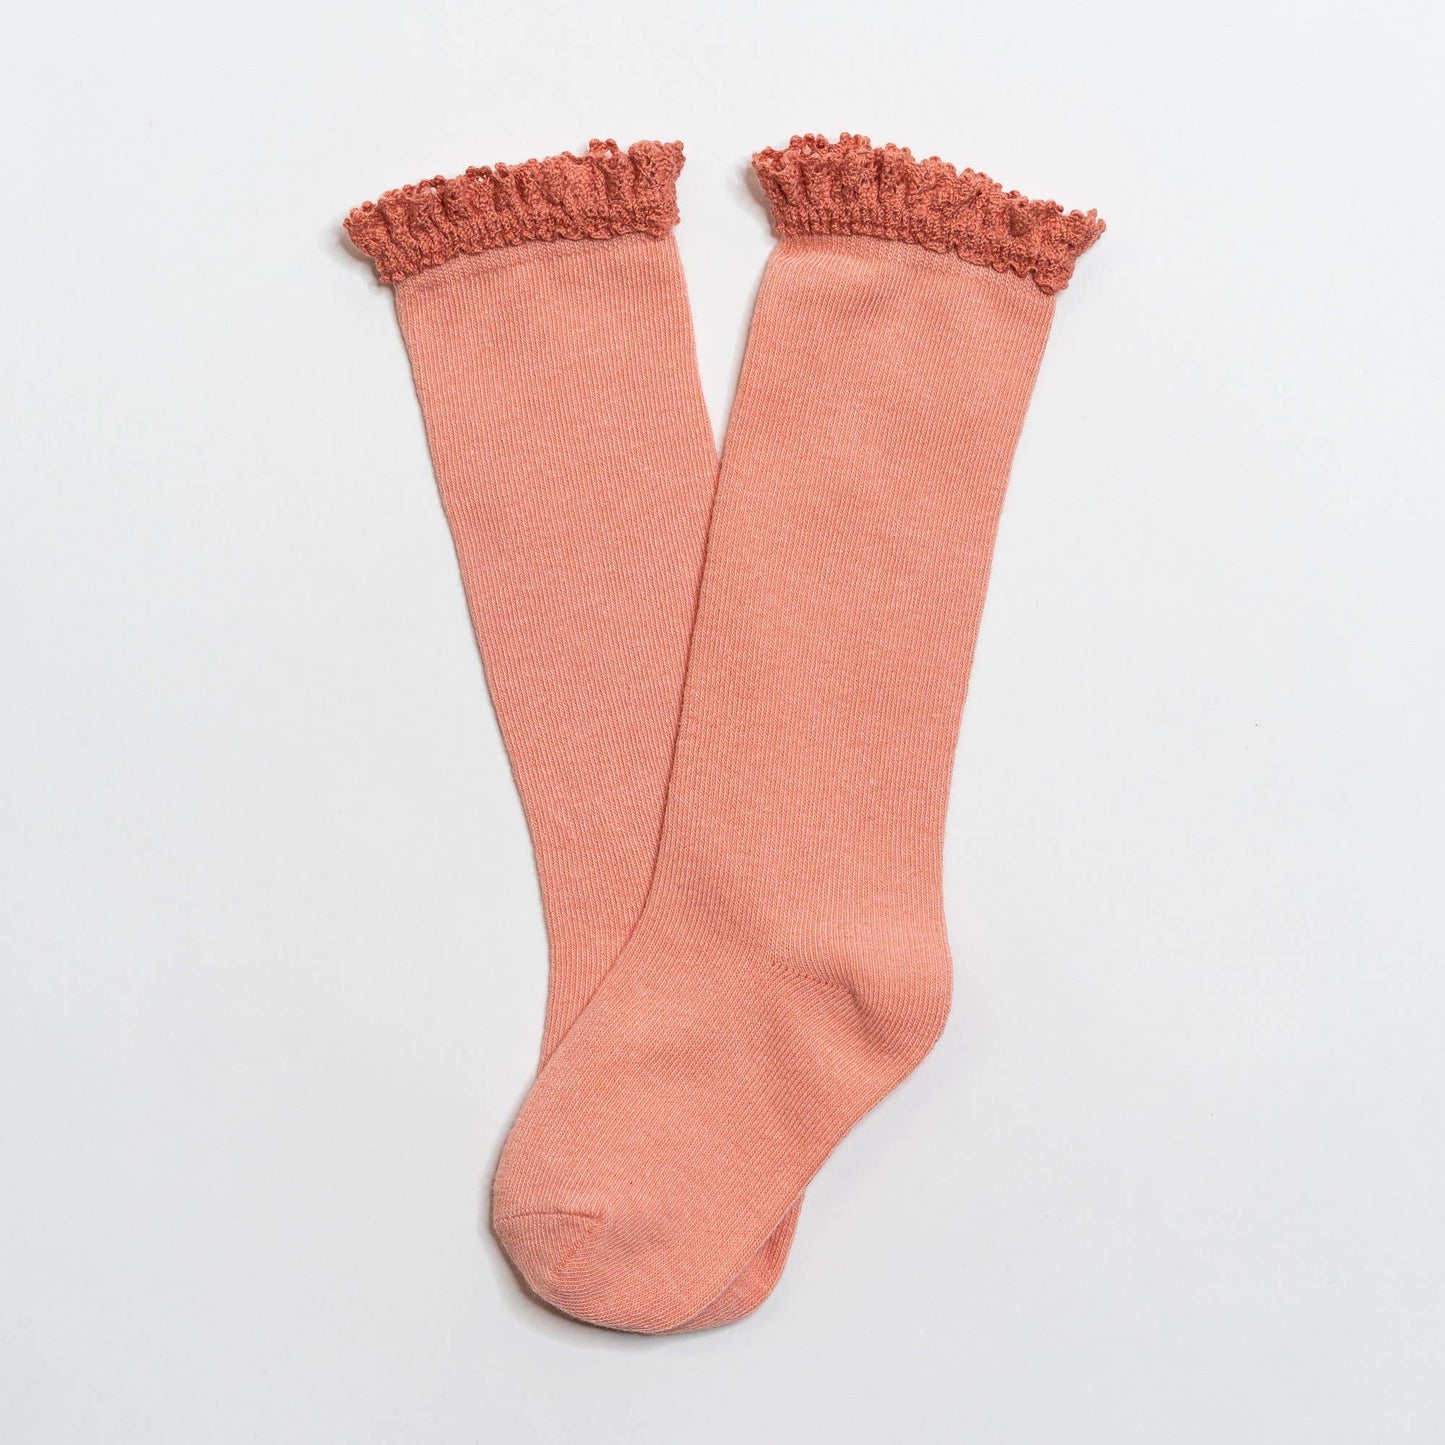 Little Stocking Co. lace top knee high socks